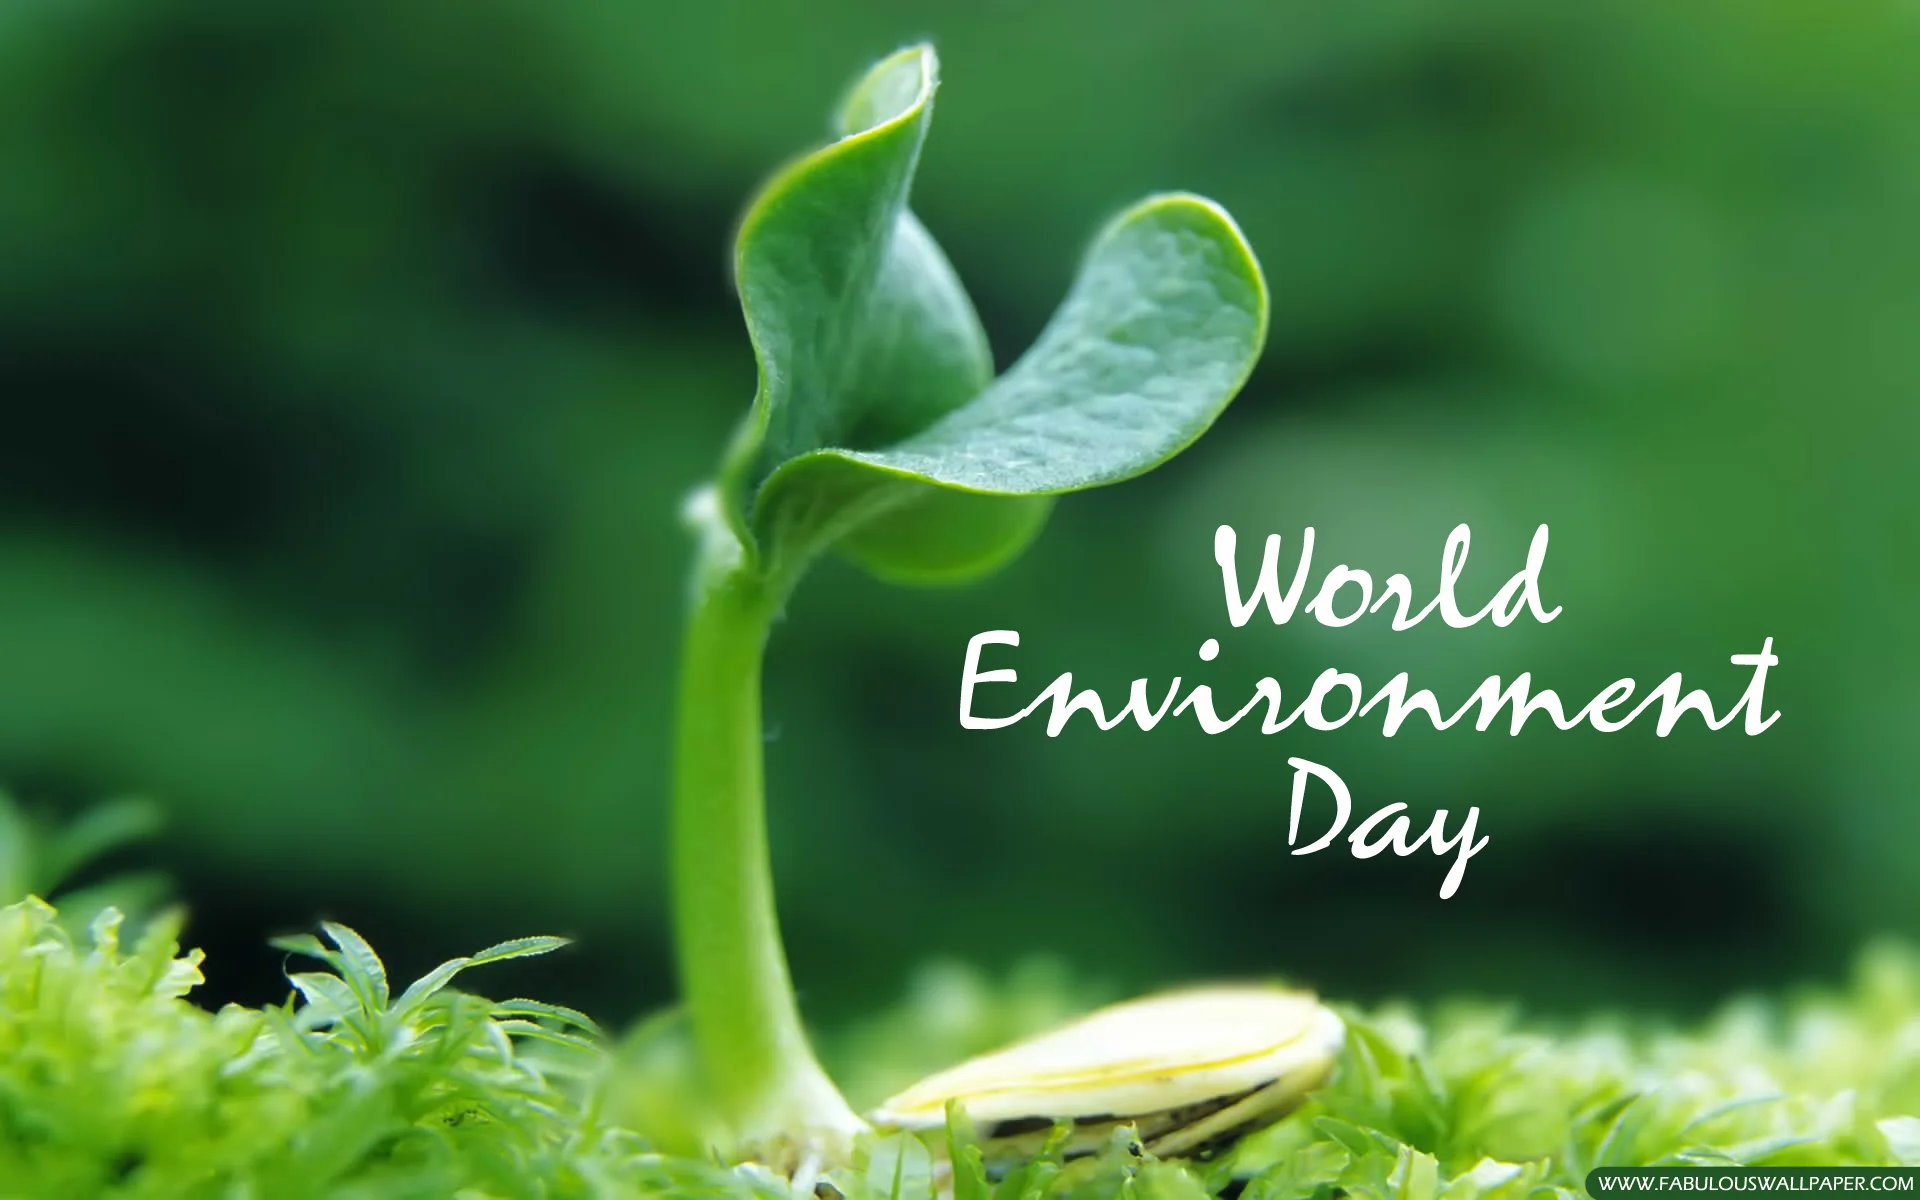 Virtual celebrations of the World Environment Day with focus on Urban Forest